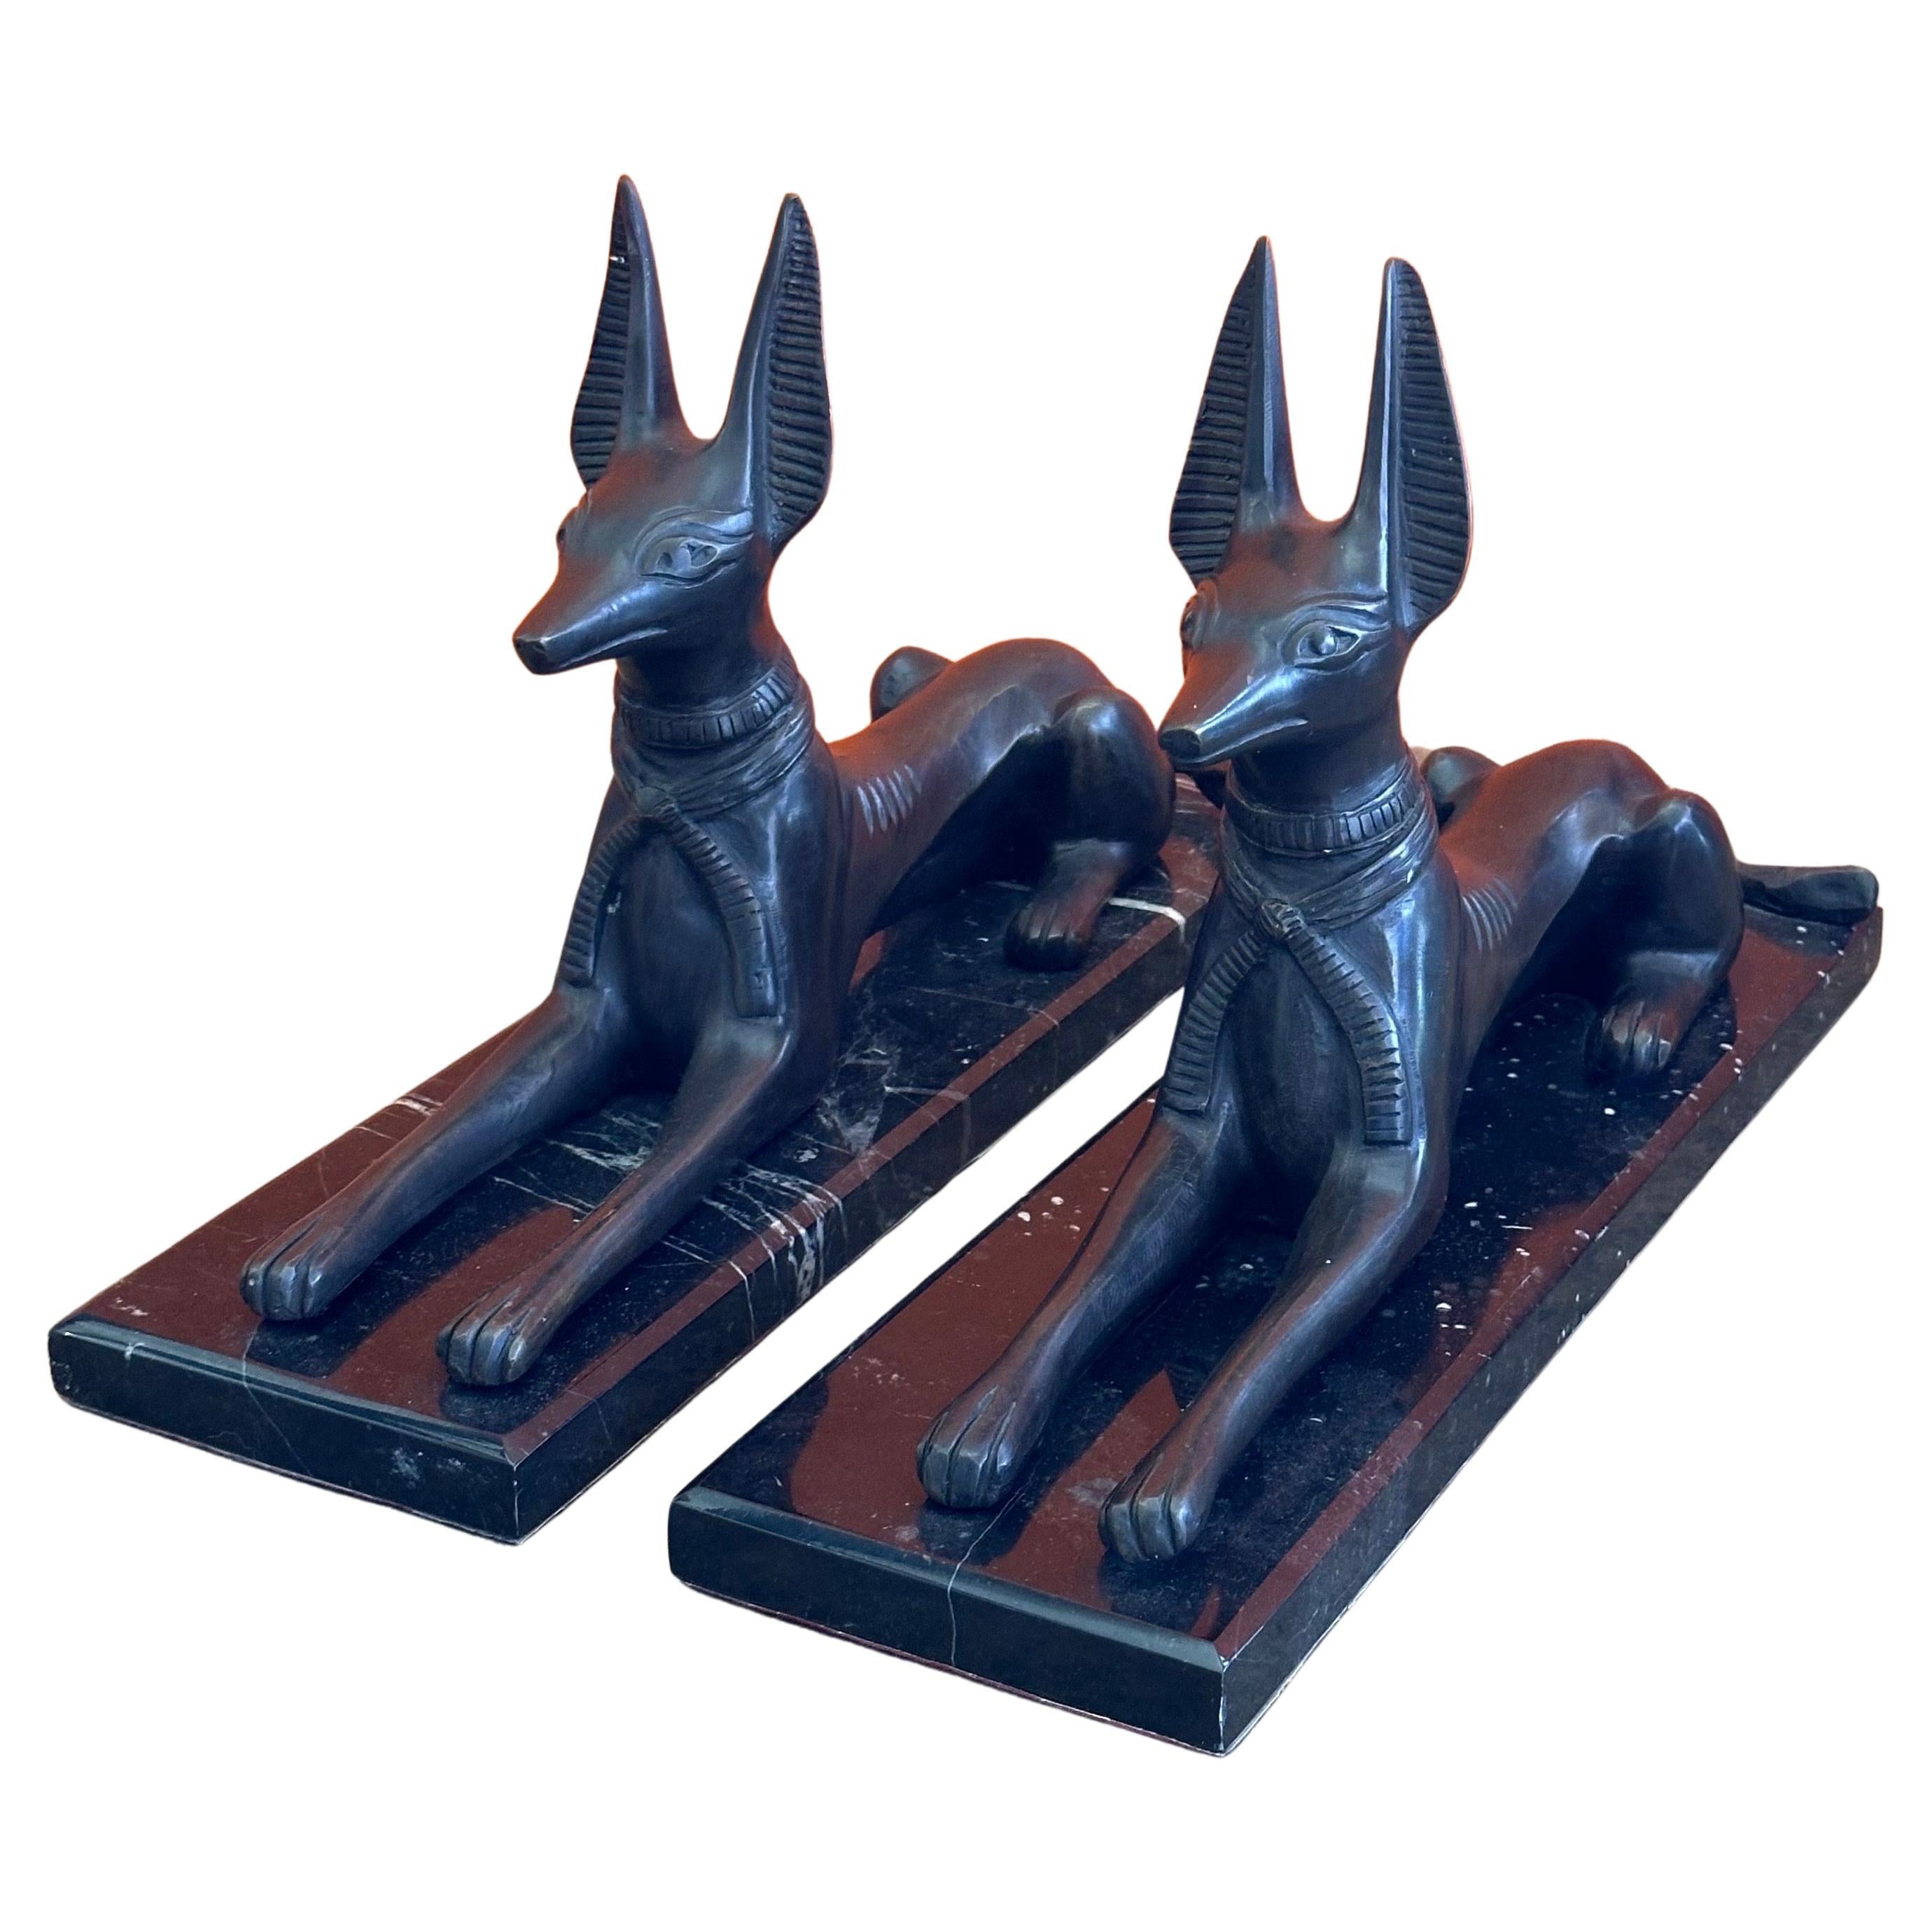 Pair of Egyptian Style Bronze Greyhounds on Marble Bases "Anubis" For Sale